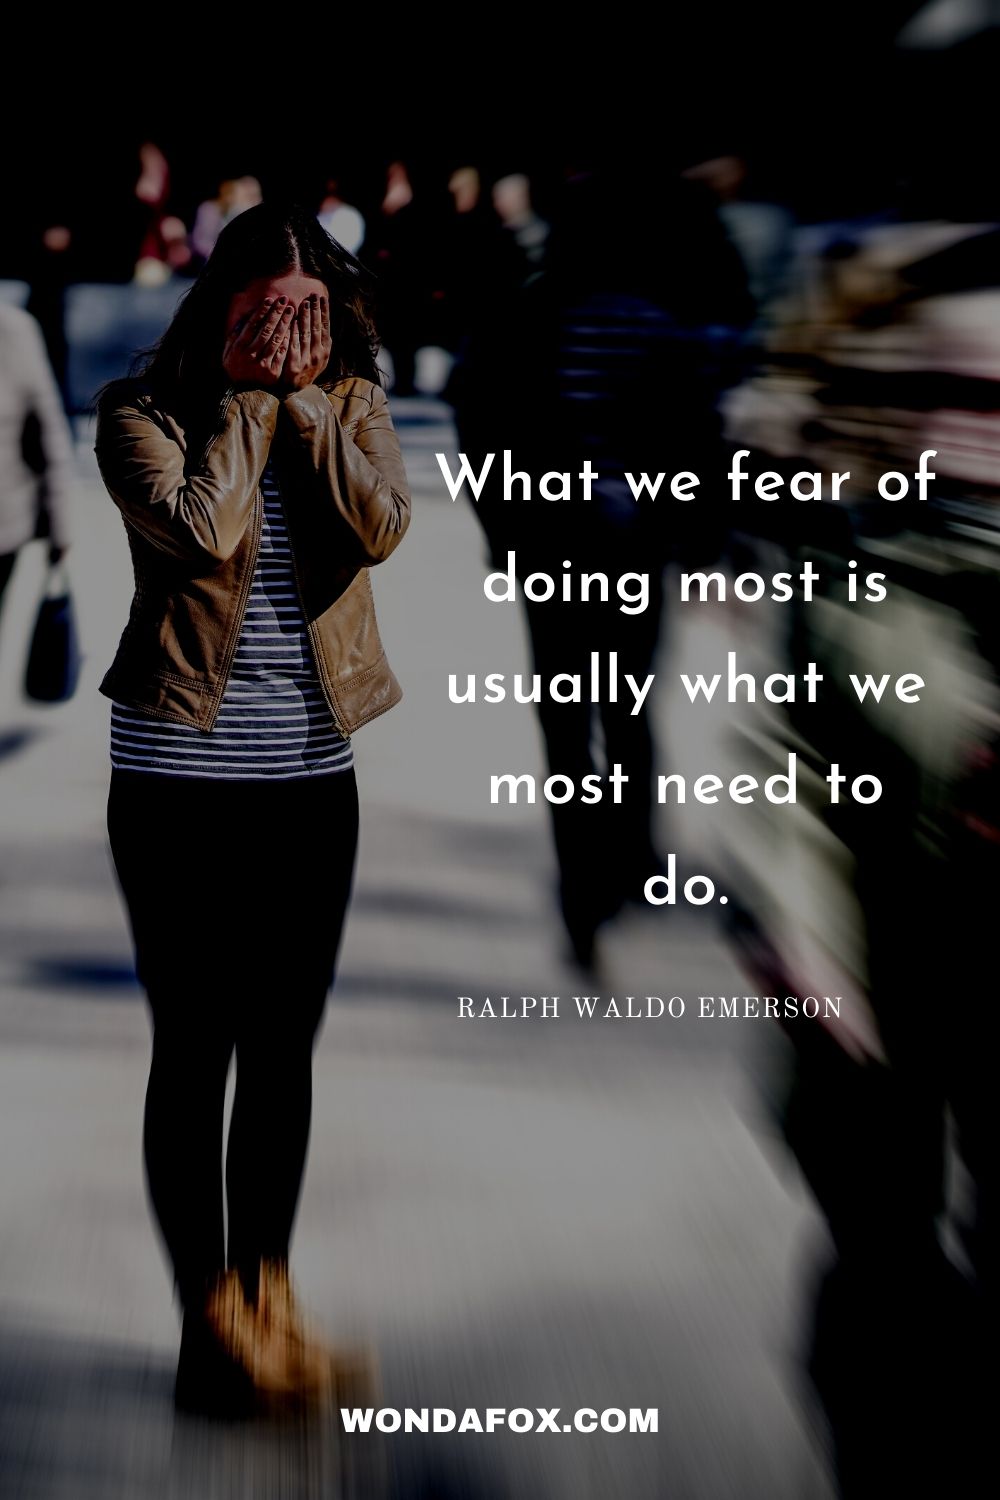 What we fear of doing most is usually what we most need to do.